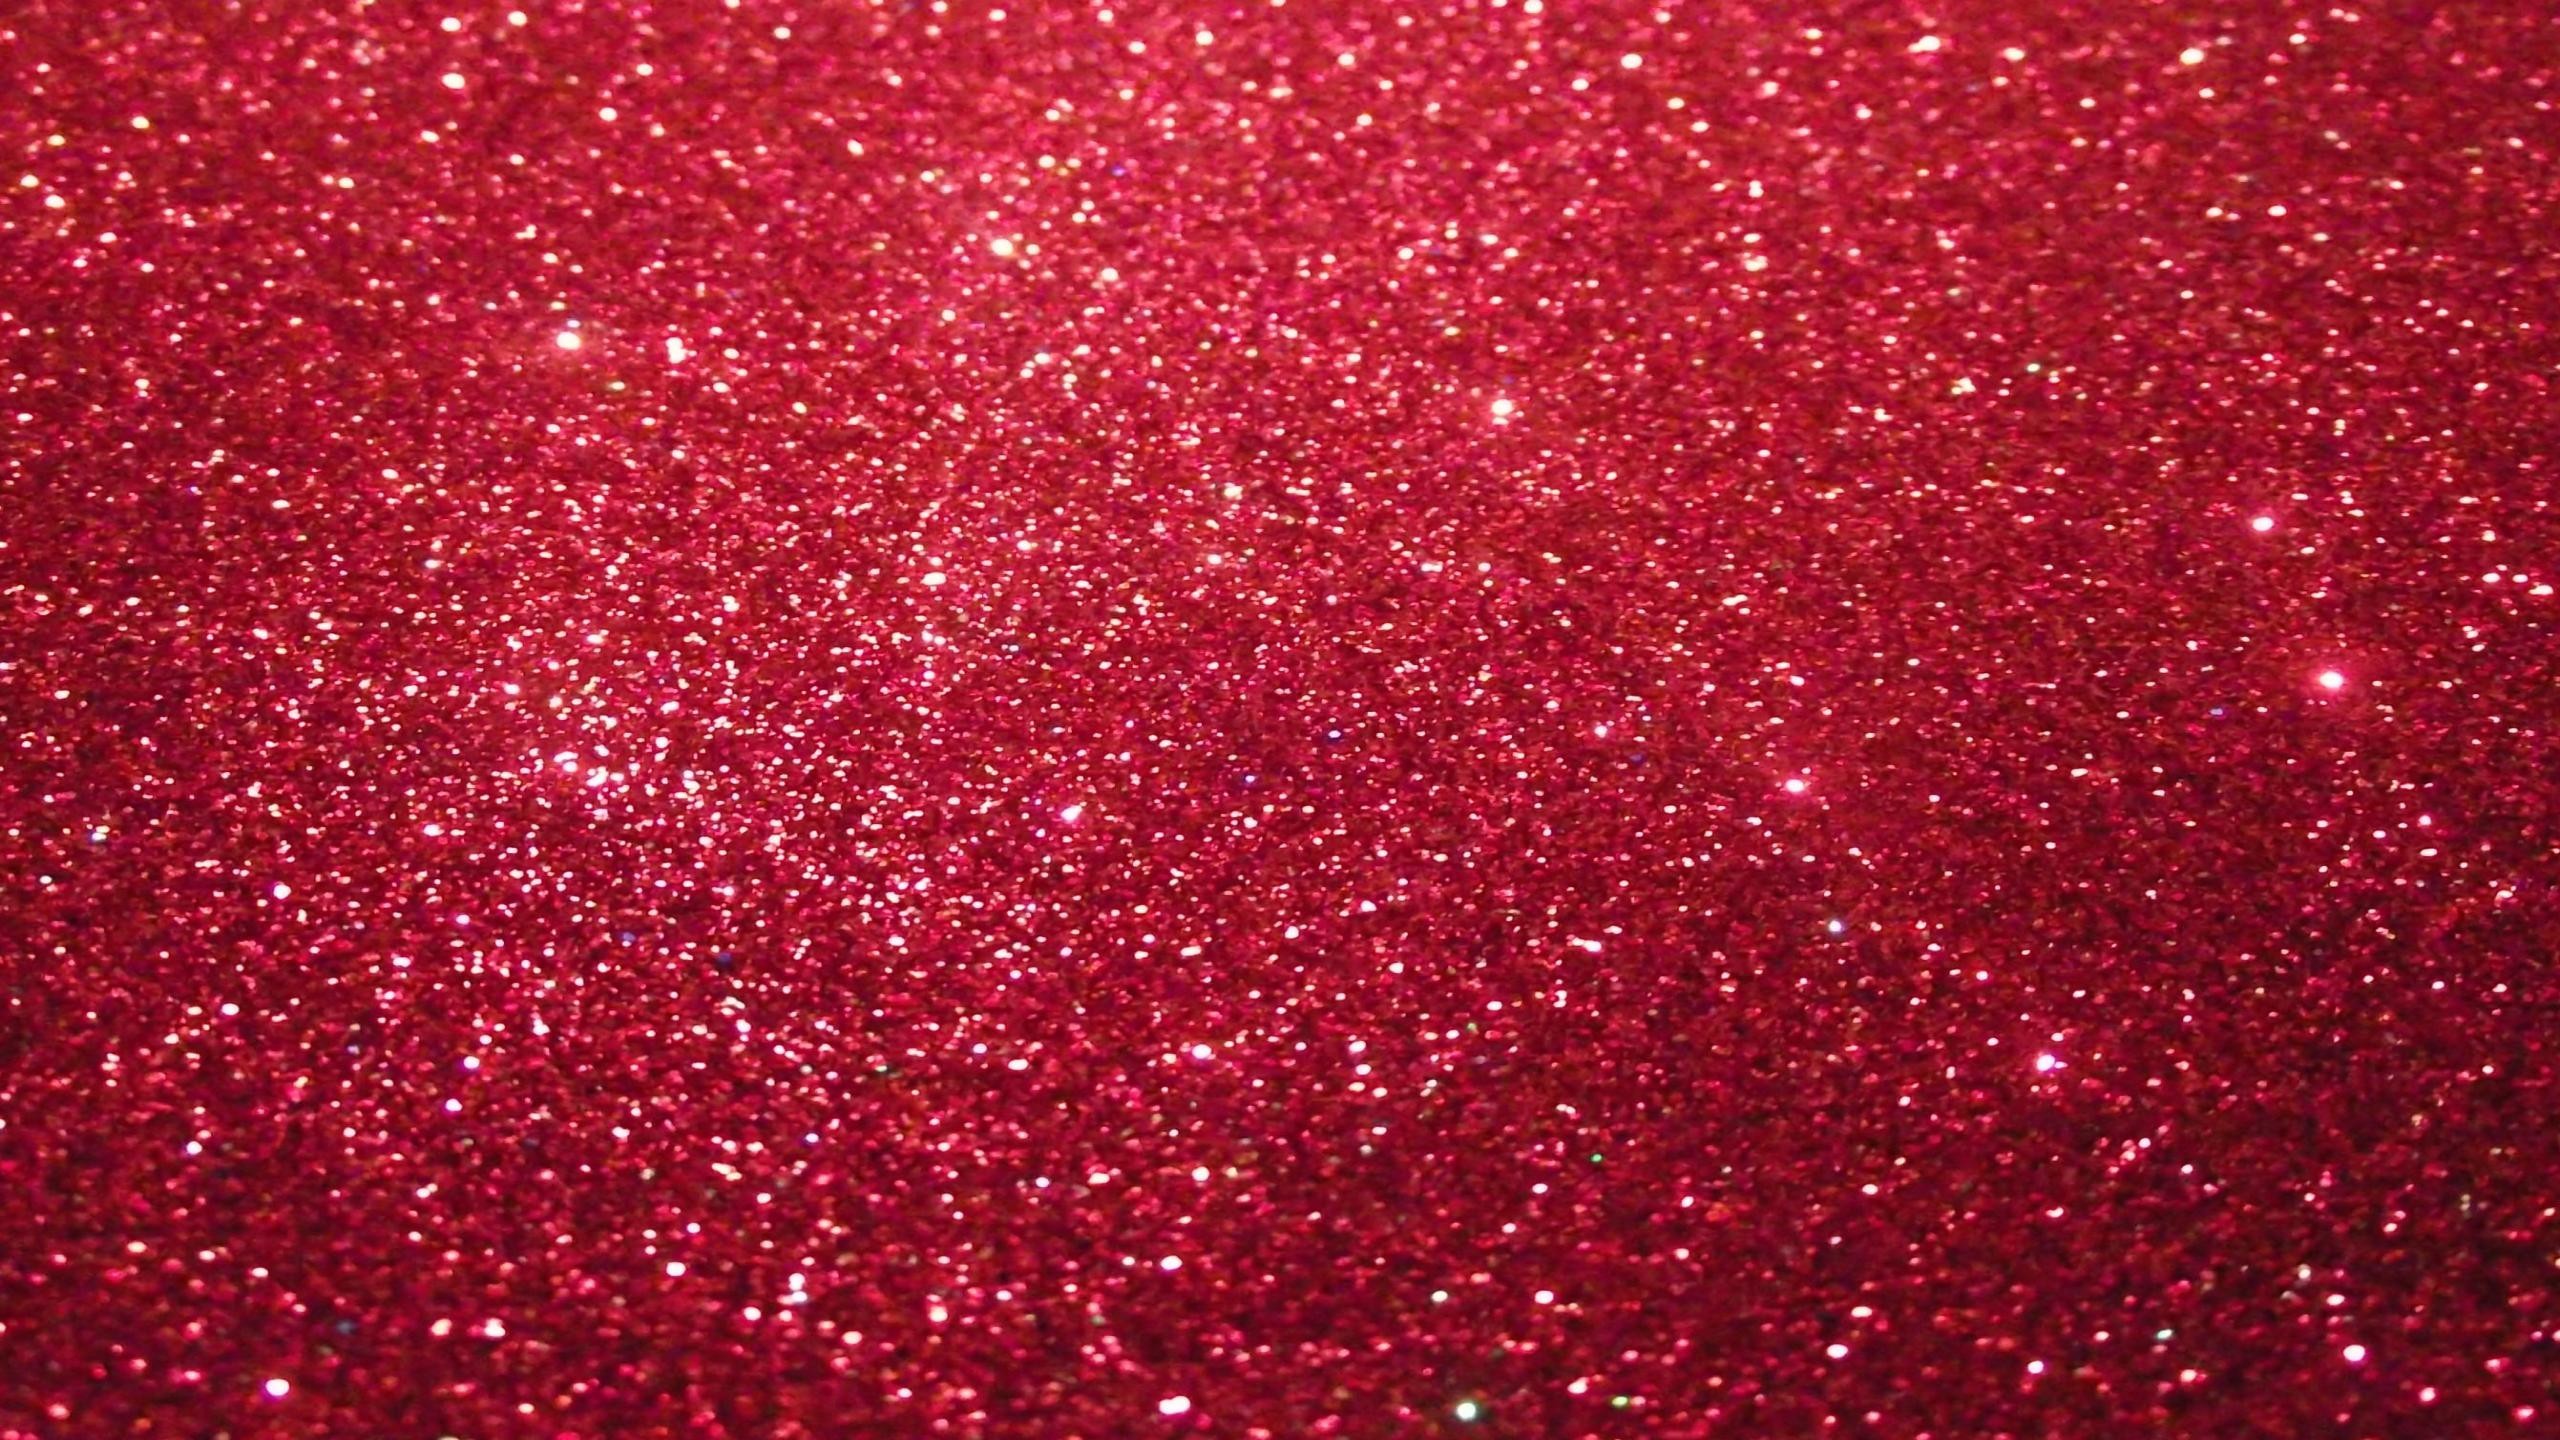 2560x1440  red glitter backgrounds image size 1024x760px violet glitter .  Download. High Quality Red Glitter Desktop Background Wallpaper